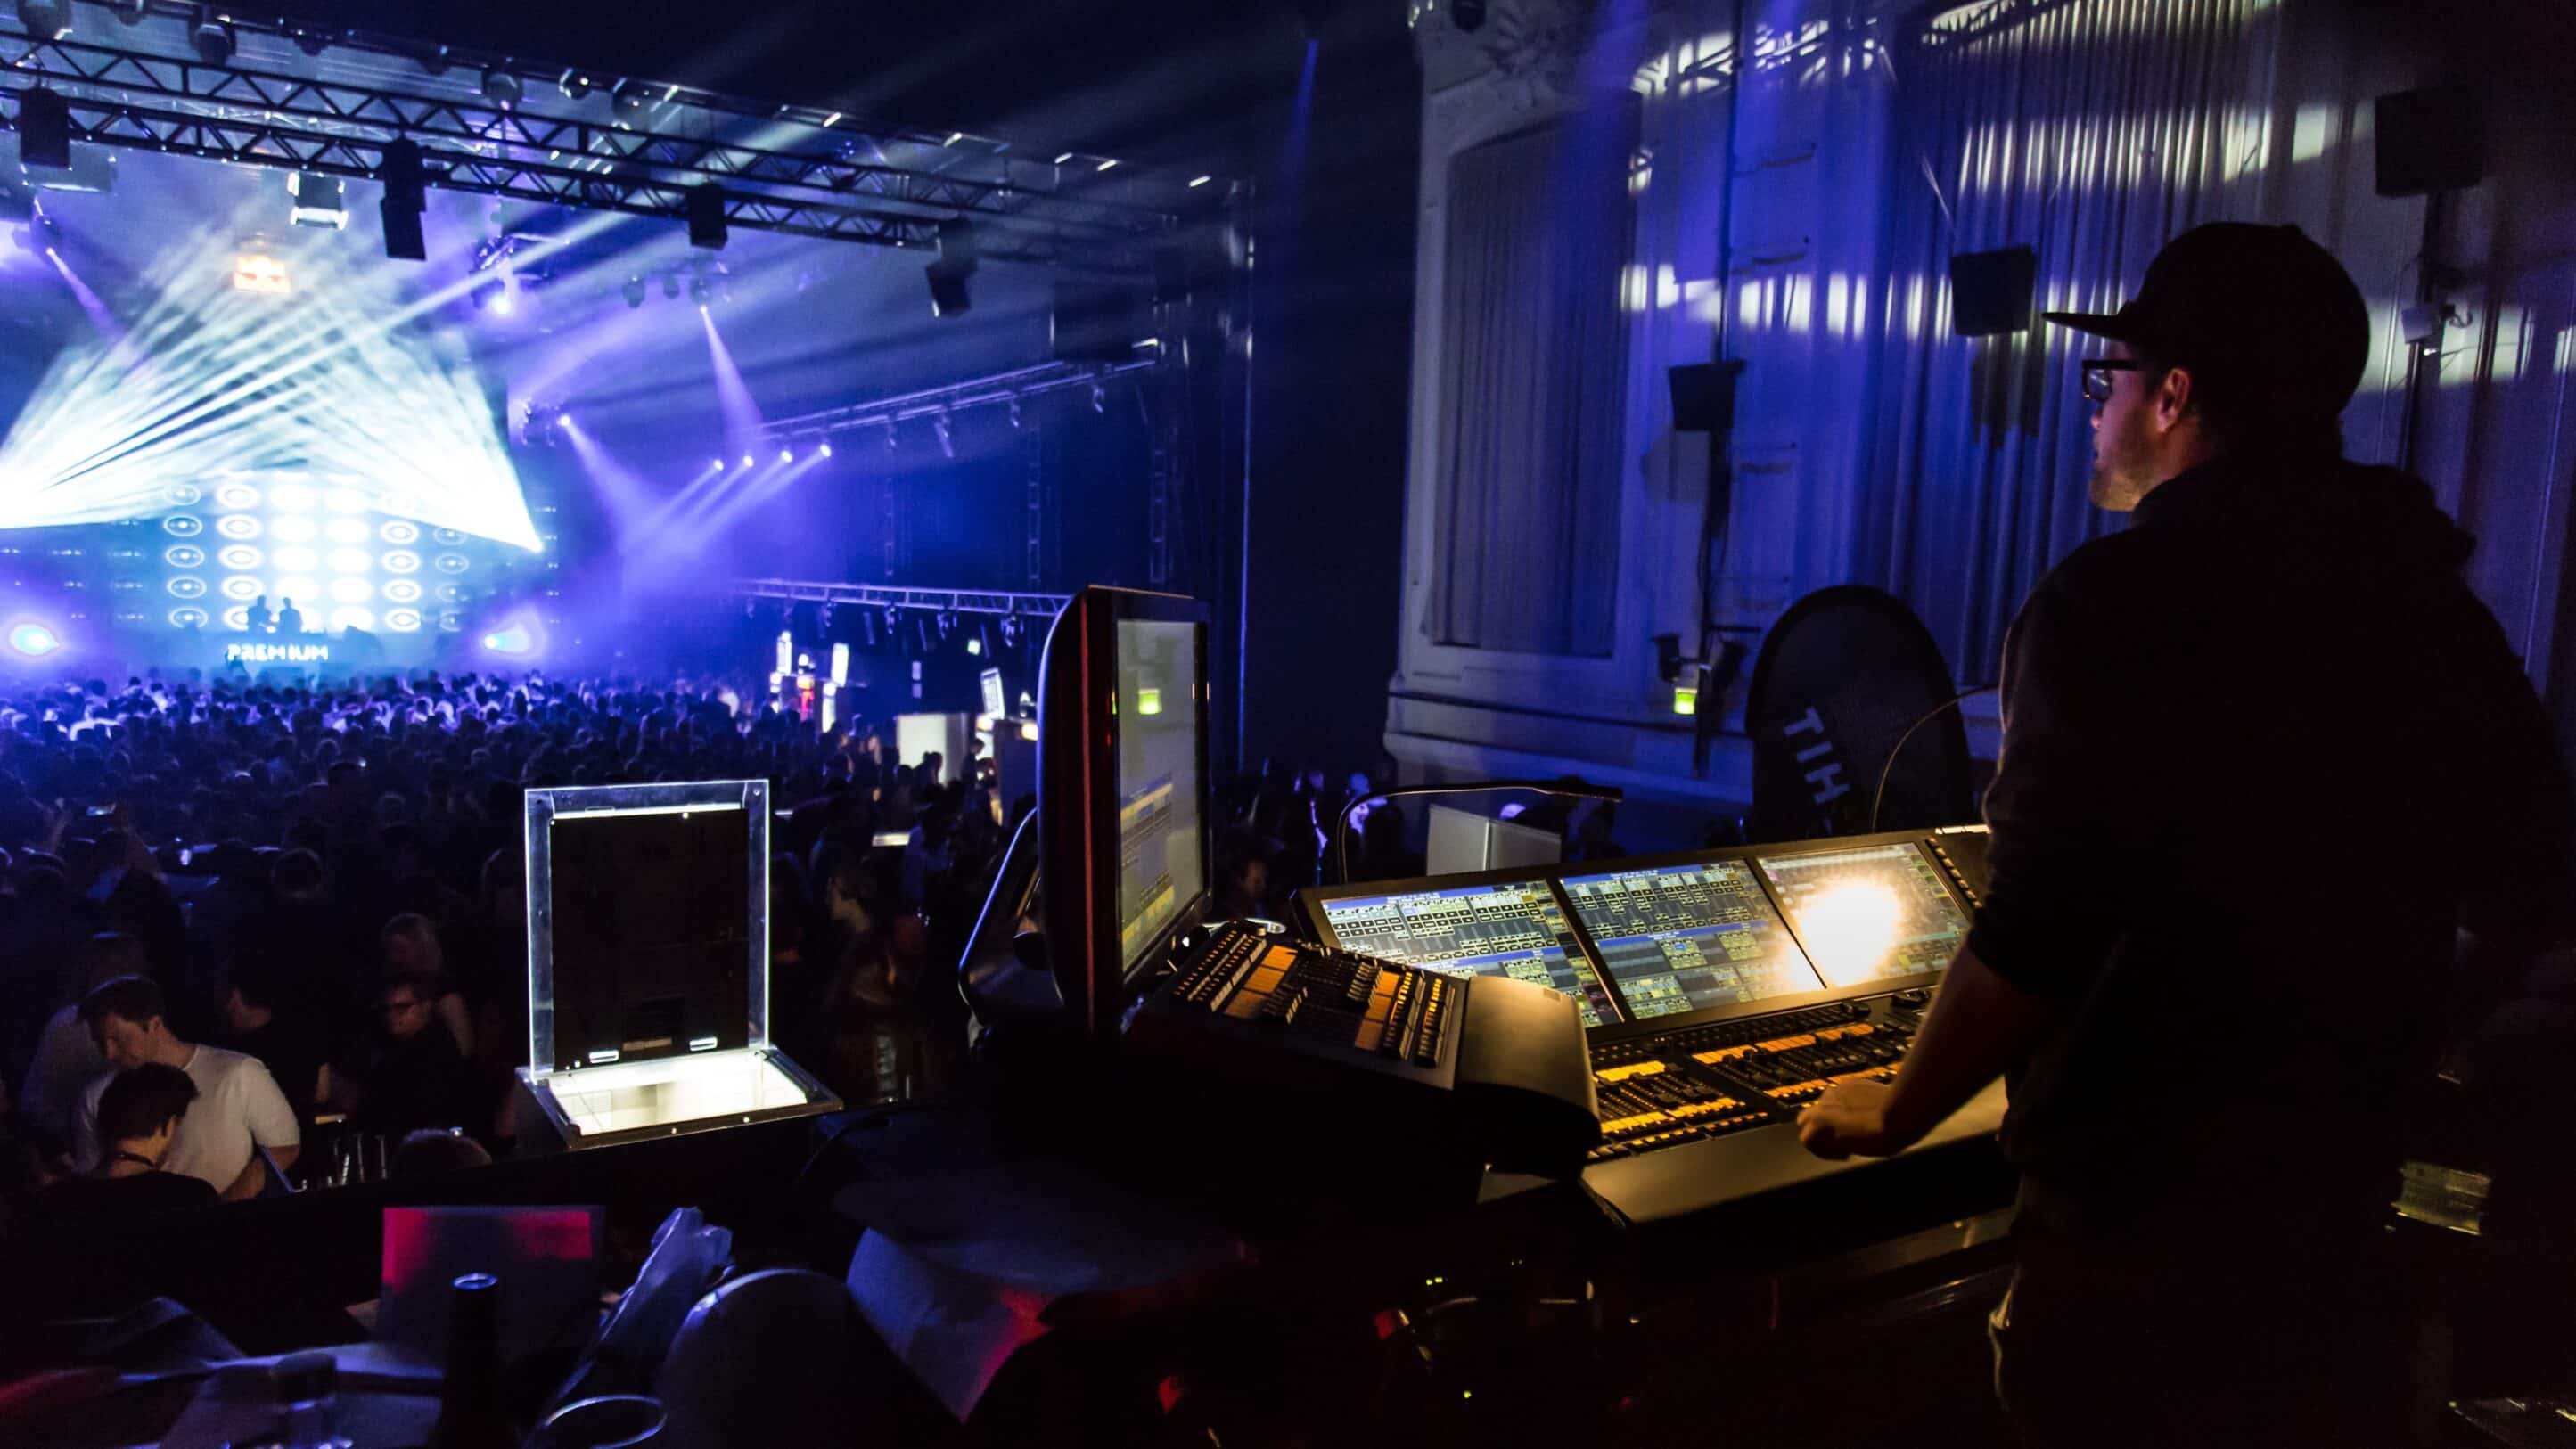 Barco immersive experience at a concert with projector